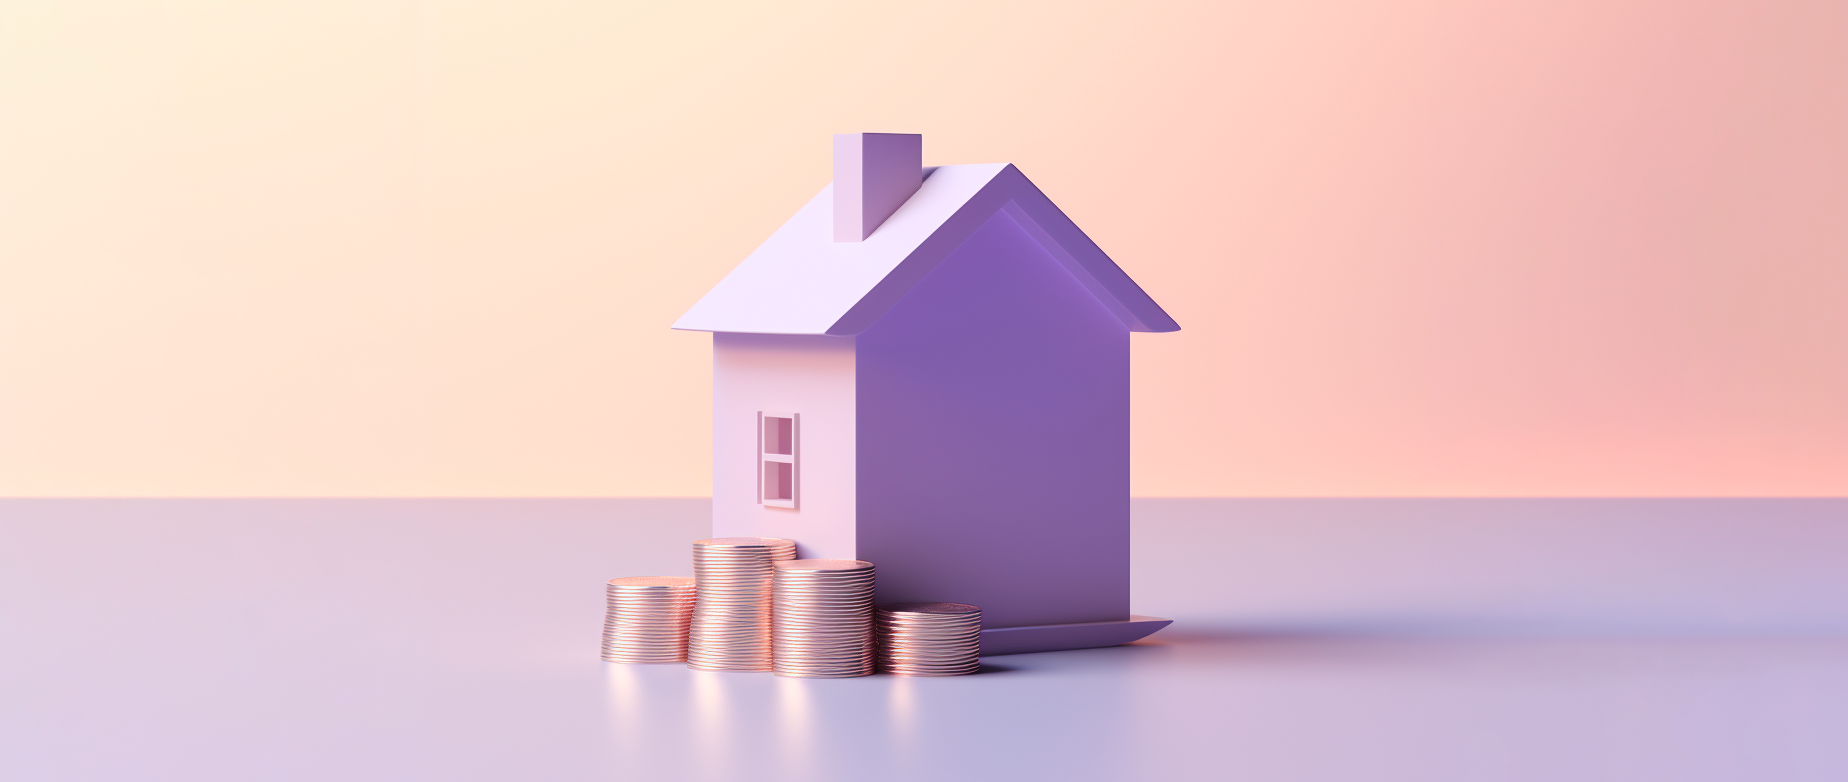 A light purple house next to stacks of coins on a light peach background.